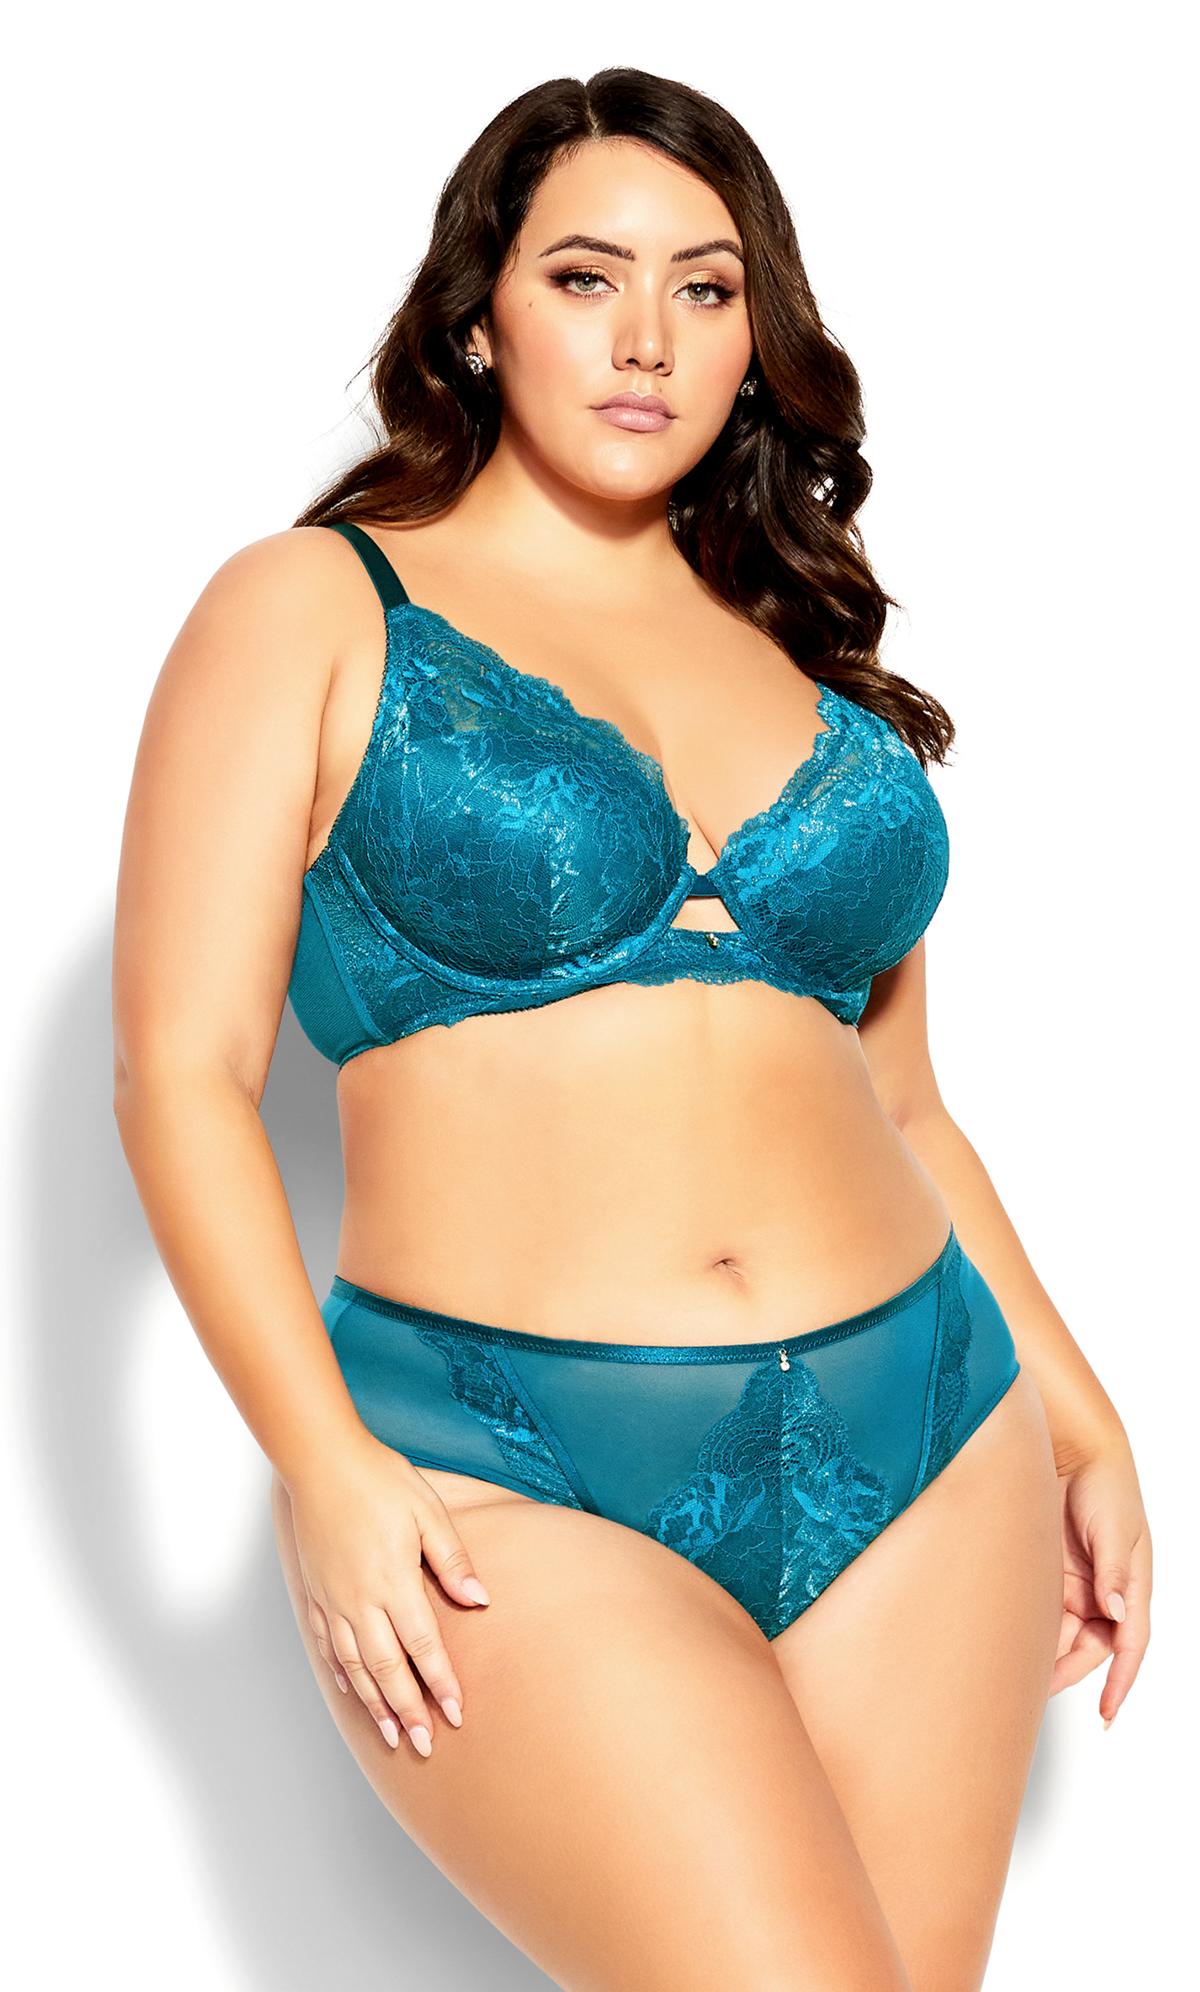 Evans Teal Blue Lace Underwired Padded Bra 1